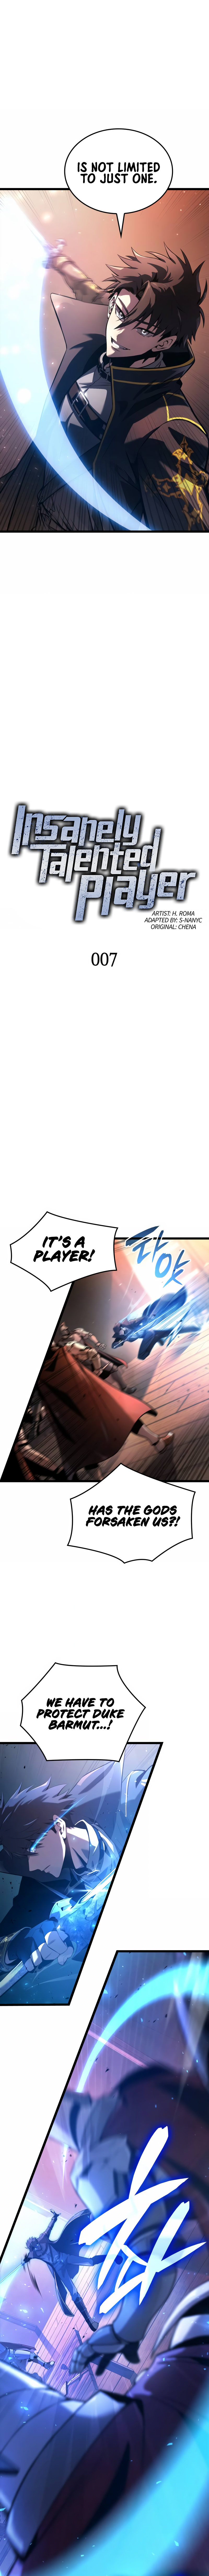 Insanely-Talented Player - Chapter 7 Page 3